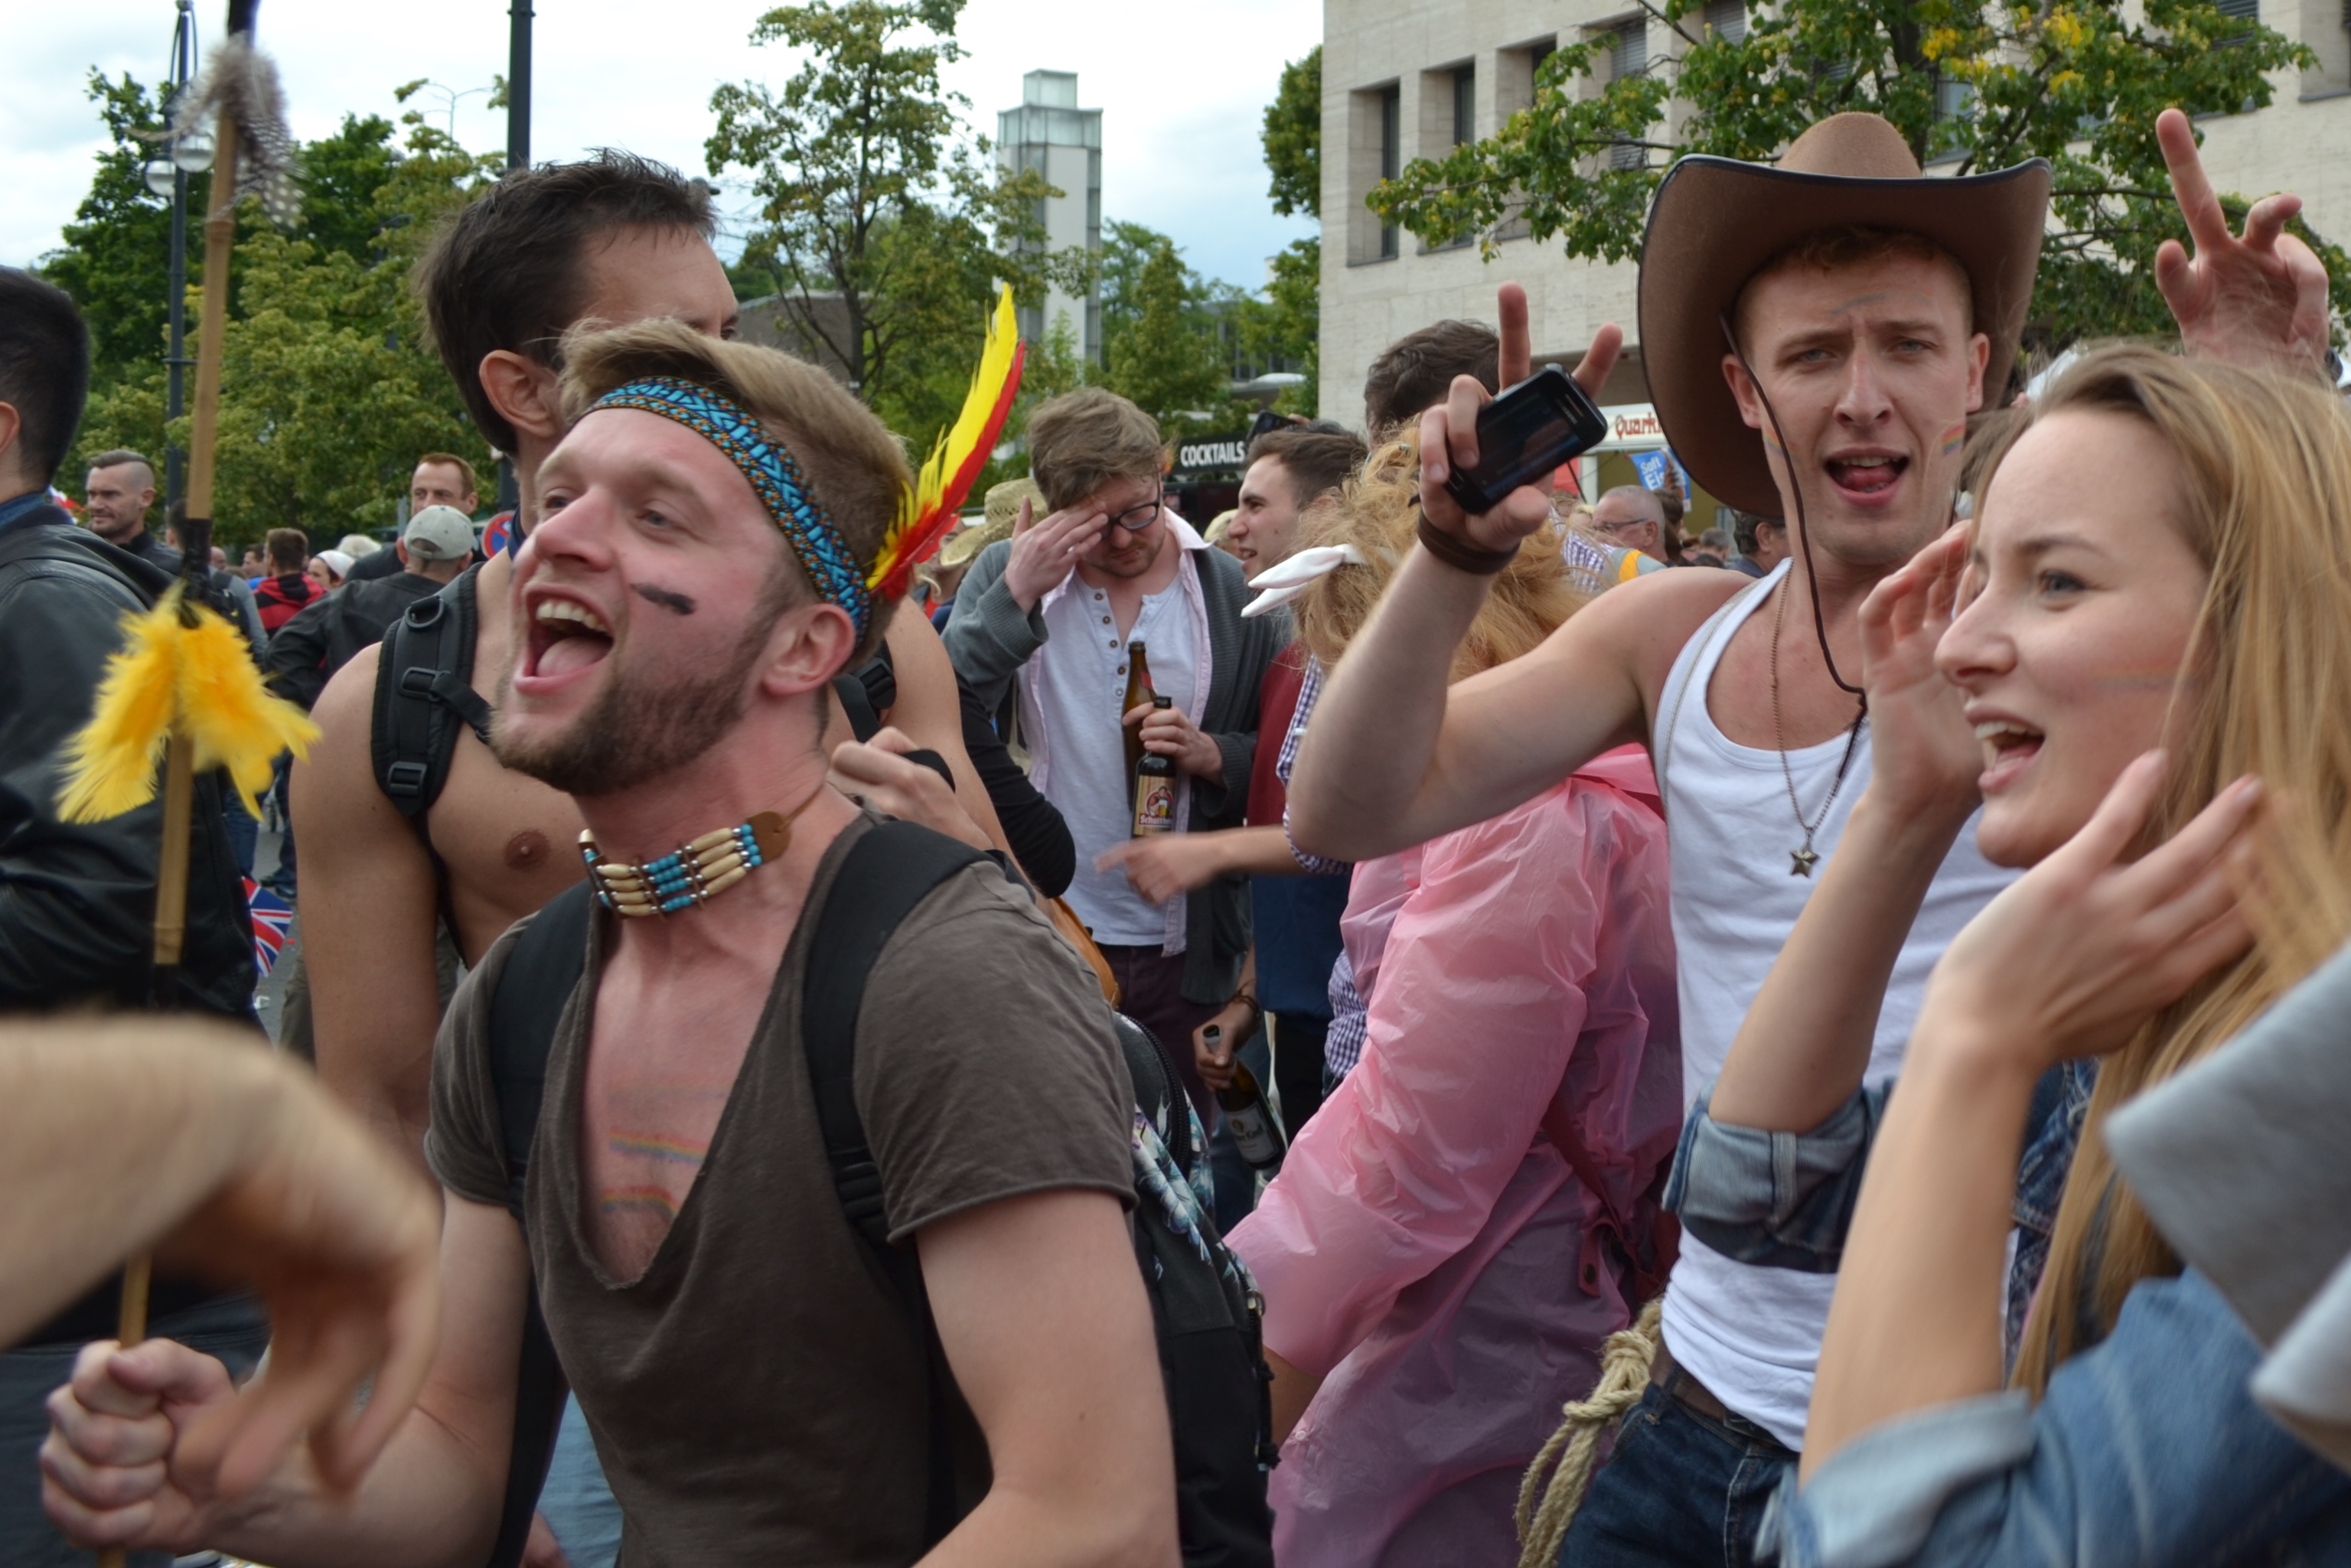 This is Christopher Street Day Taking Over Berlin 